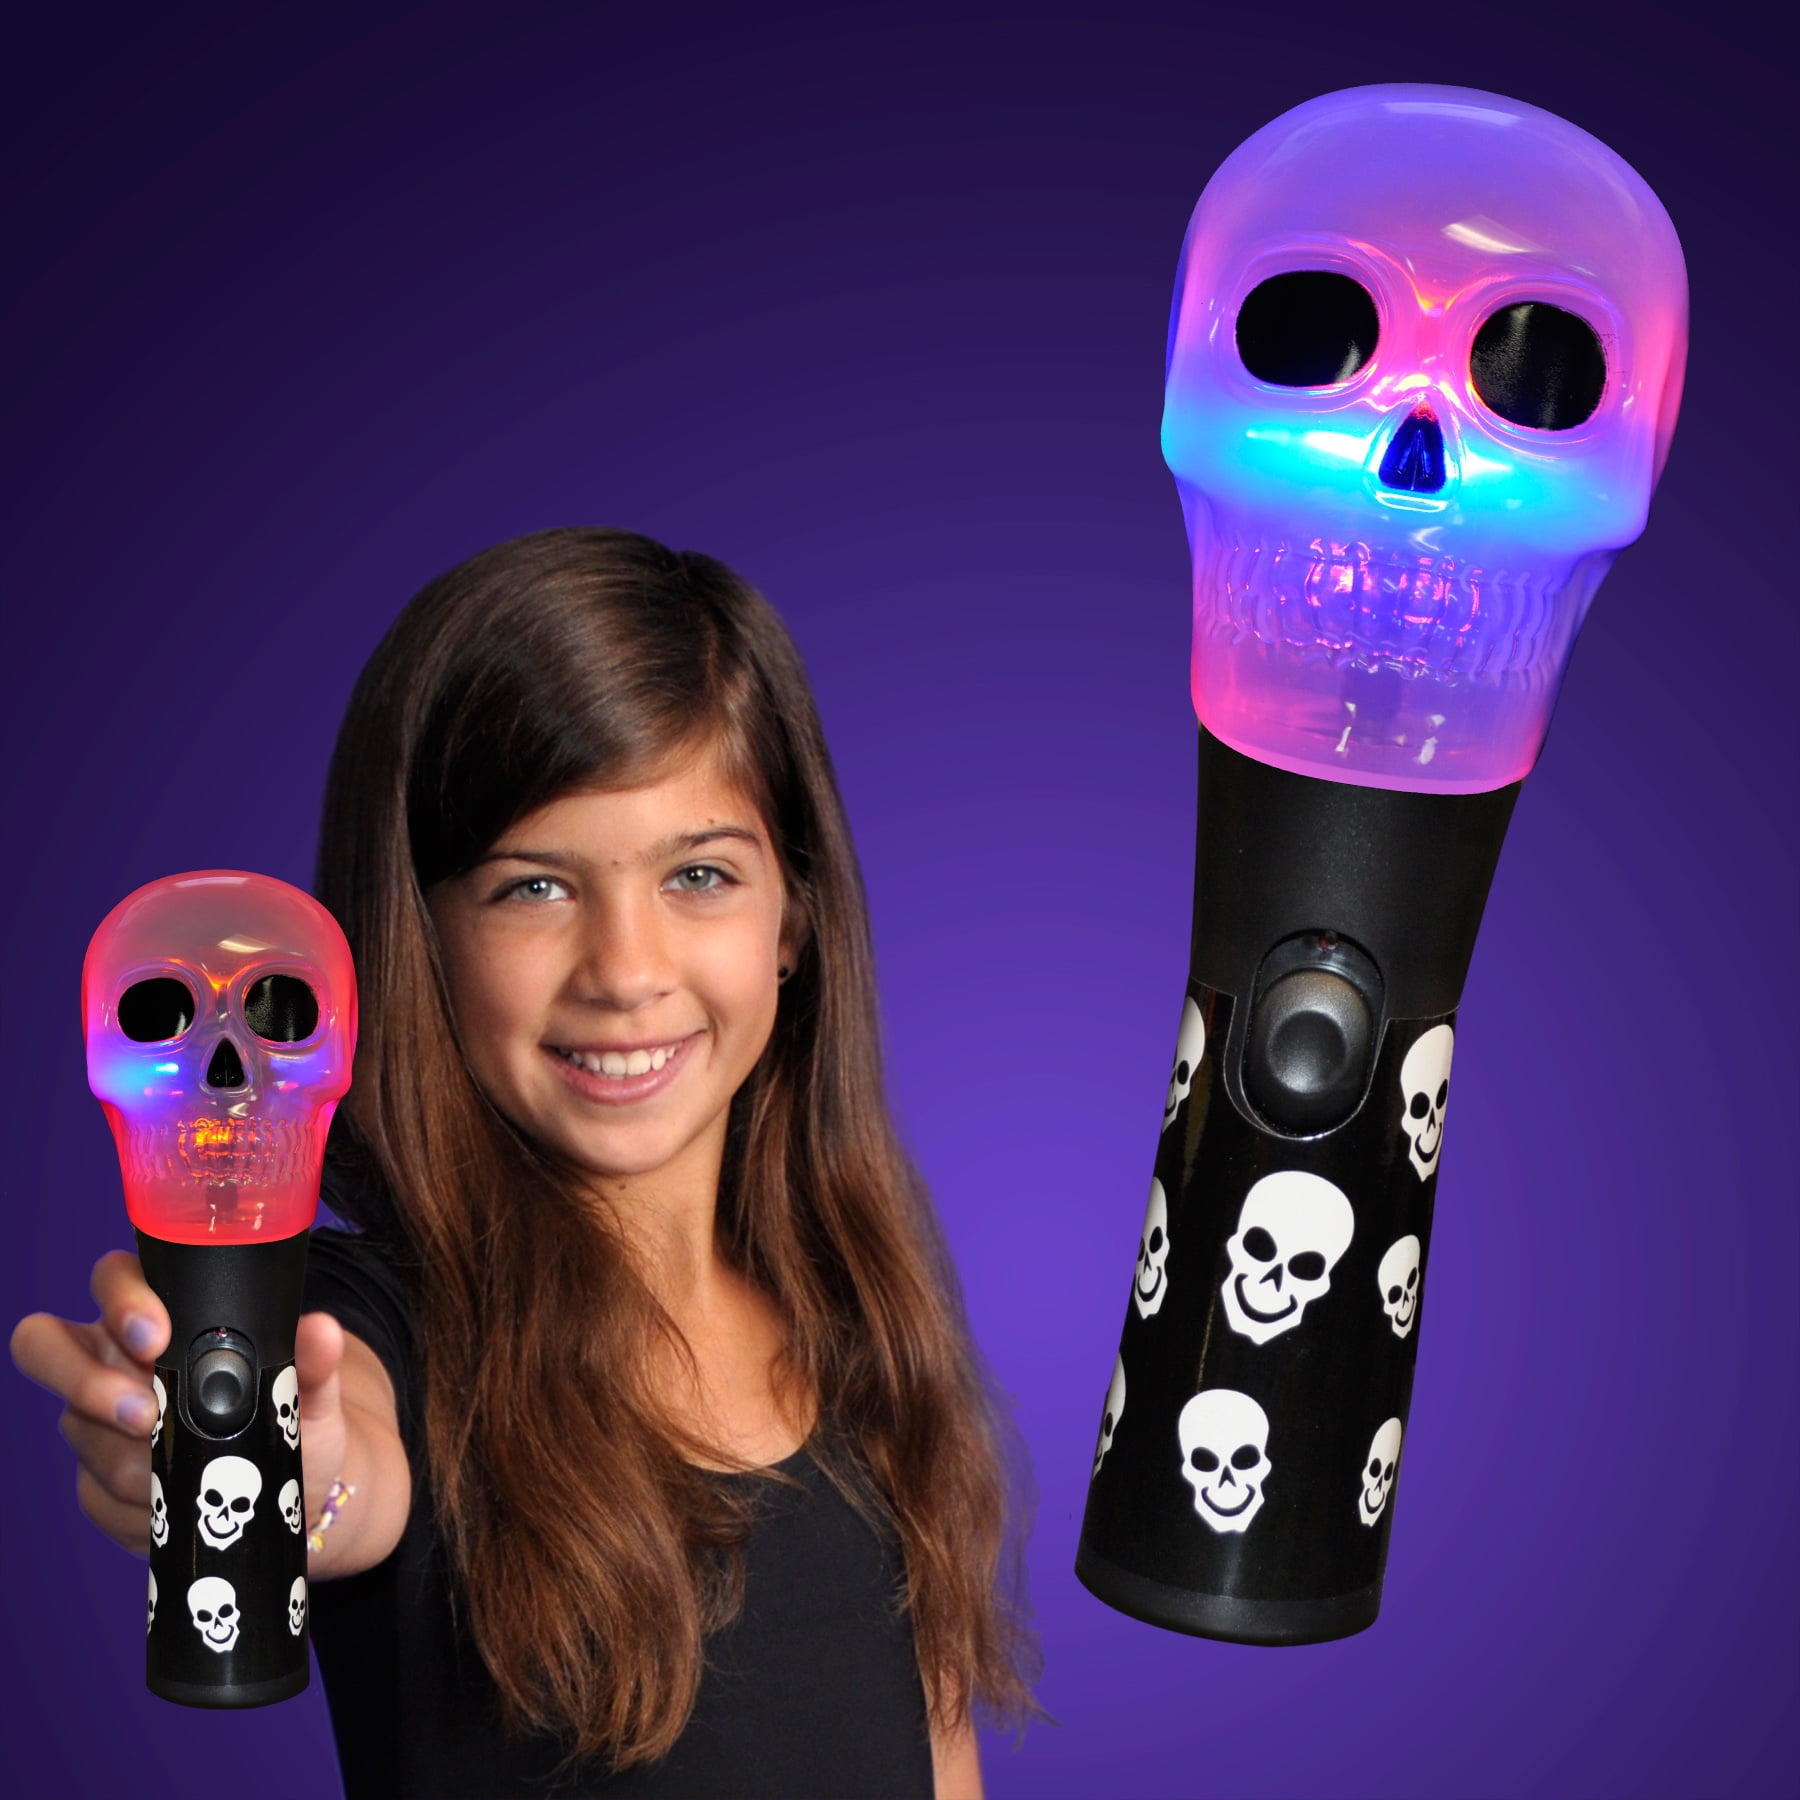 Spinner Wand LED Light Up Colorful Skull Spinner Wand Toy Kids Halloween Access. 